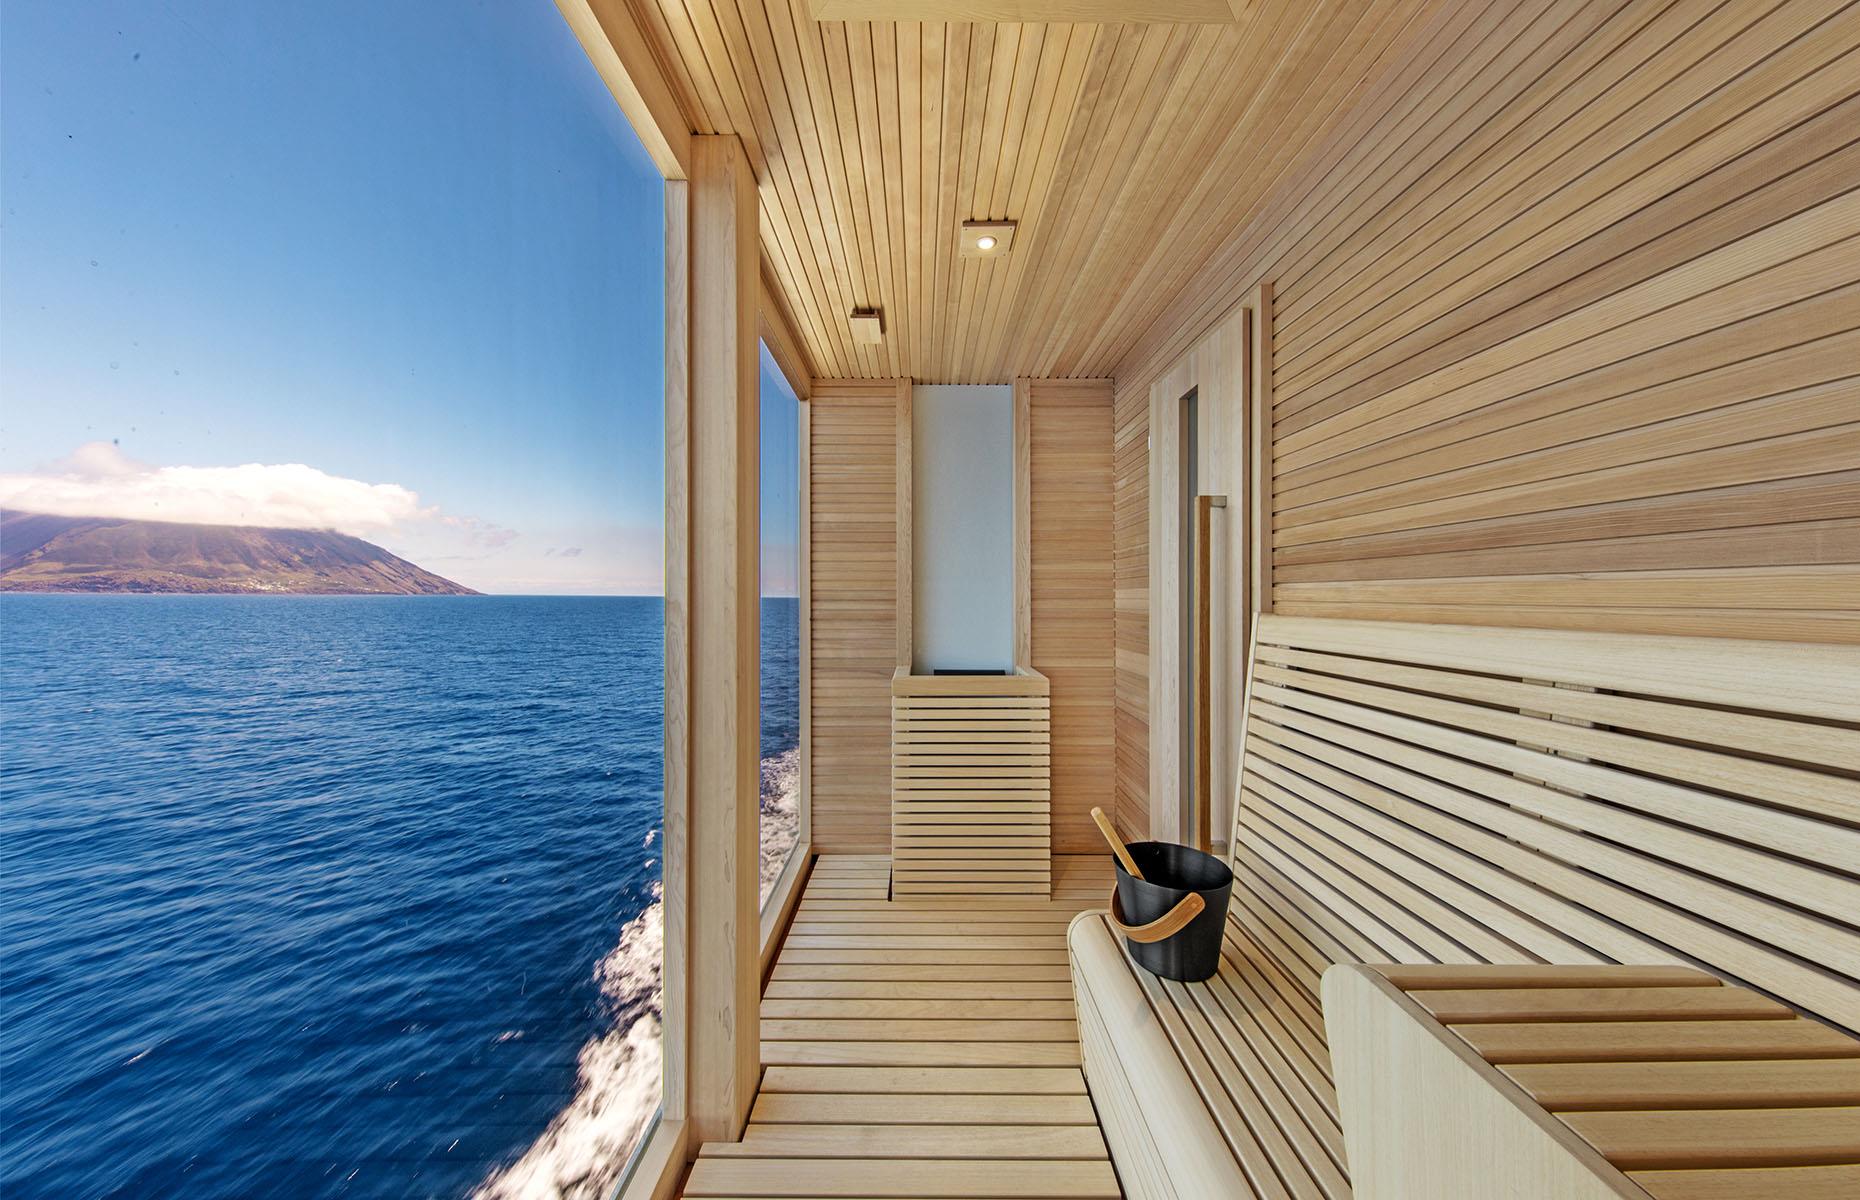 <p>However, we think the standout perk has to be this private ocean-view dry sauna, which is accessed from your own personal veranda. In 2024, Saturn will be calling at ports all over Europe, as well as taking in Iceland's majestic landscapes and sailing the trade routes of the Middle Ages. Saturn's newest route sails from Barcelona to Mumbai, stopping for 20 tours across 12 countries in 35 days. Prices for the Owner's Suite start from around $18.8k per person for the shorter eight-day itineraries. </p>